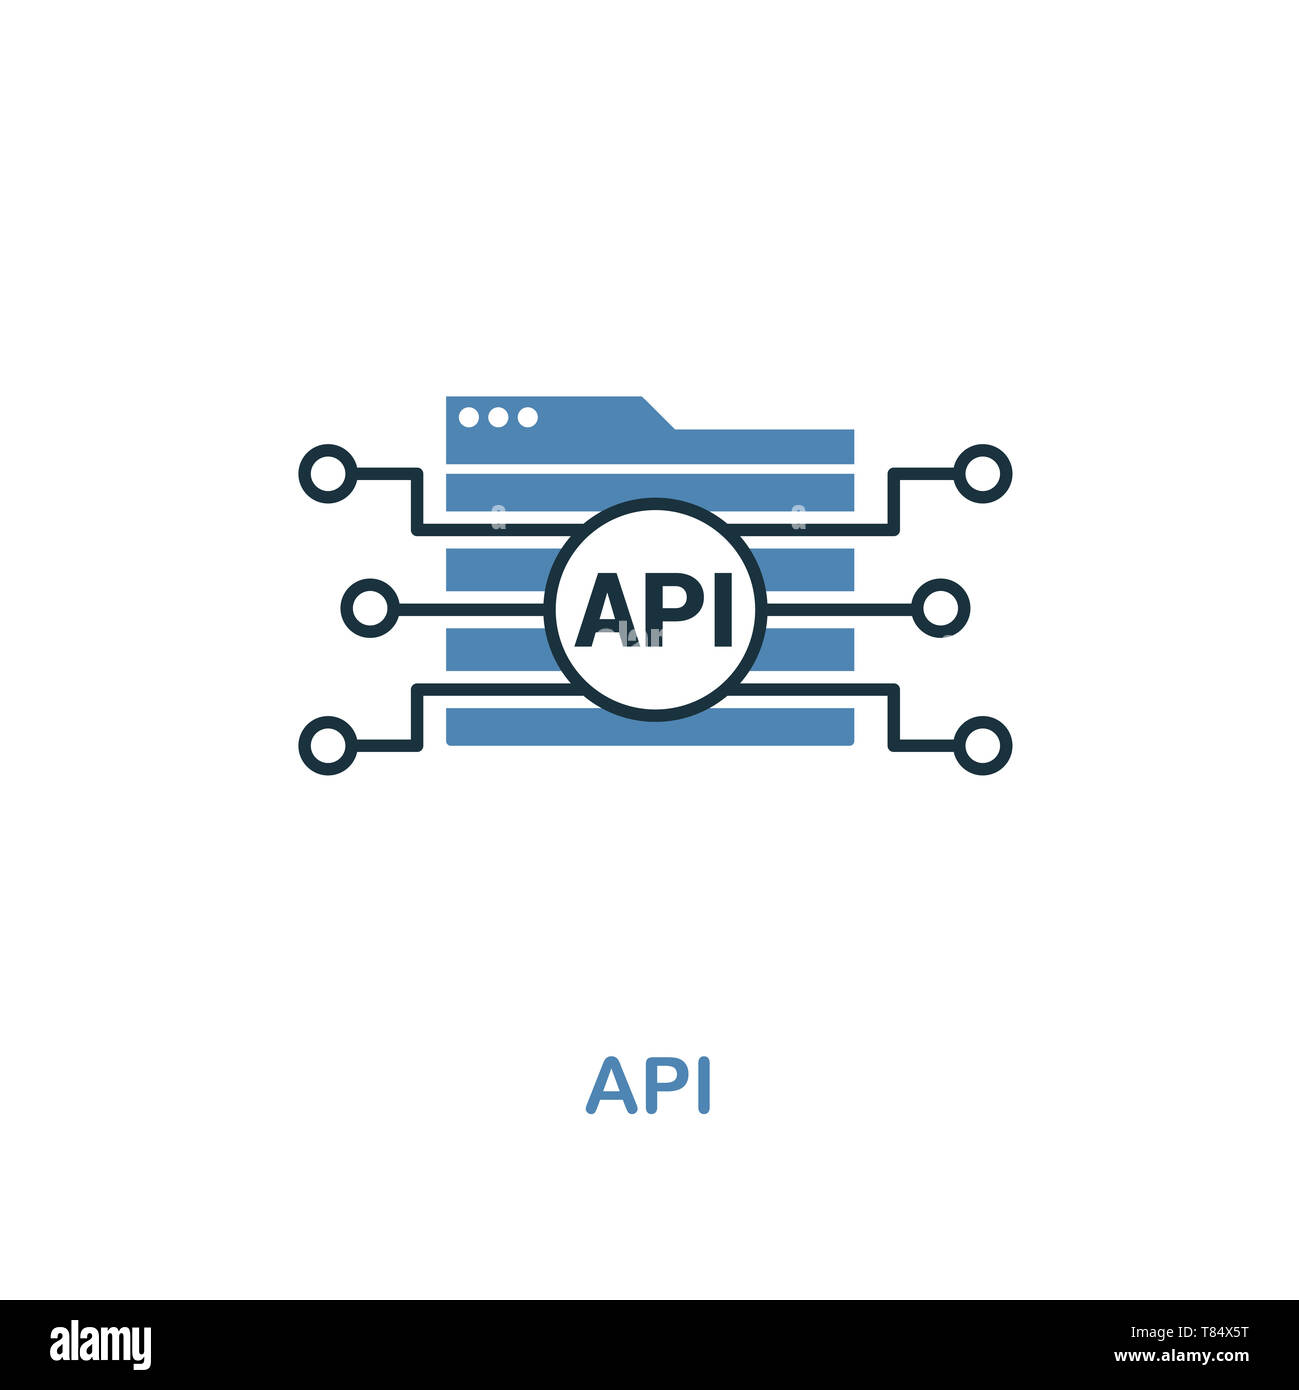 Api Creative Icon In Two Colors Premium Style Design From Web